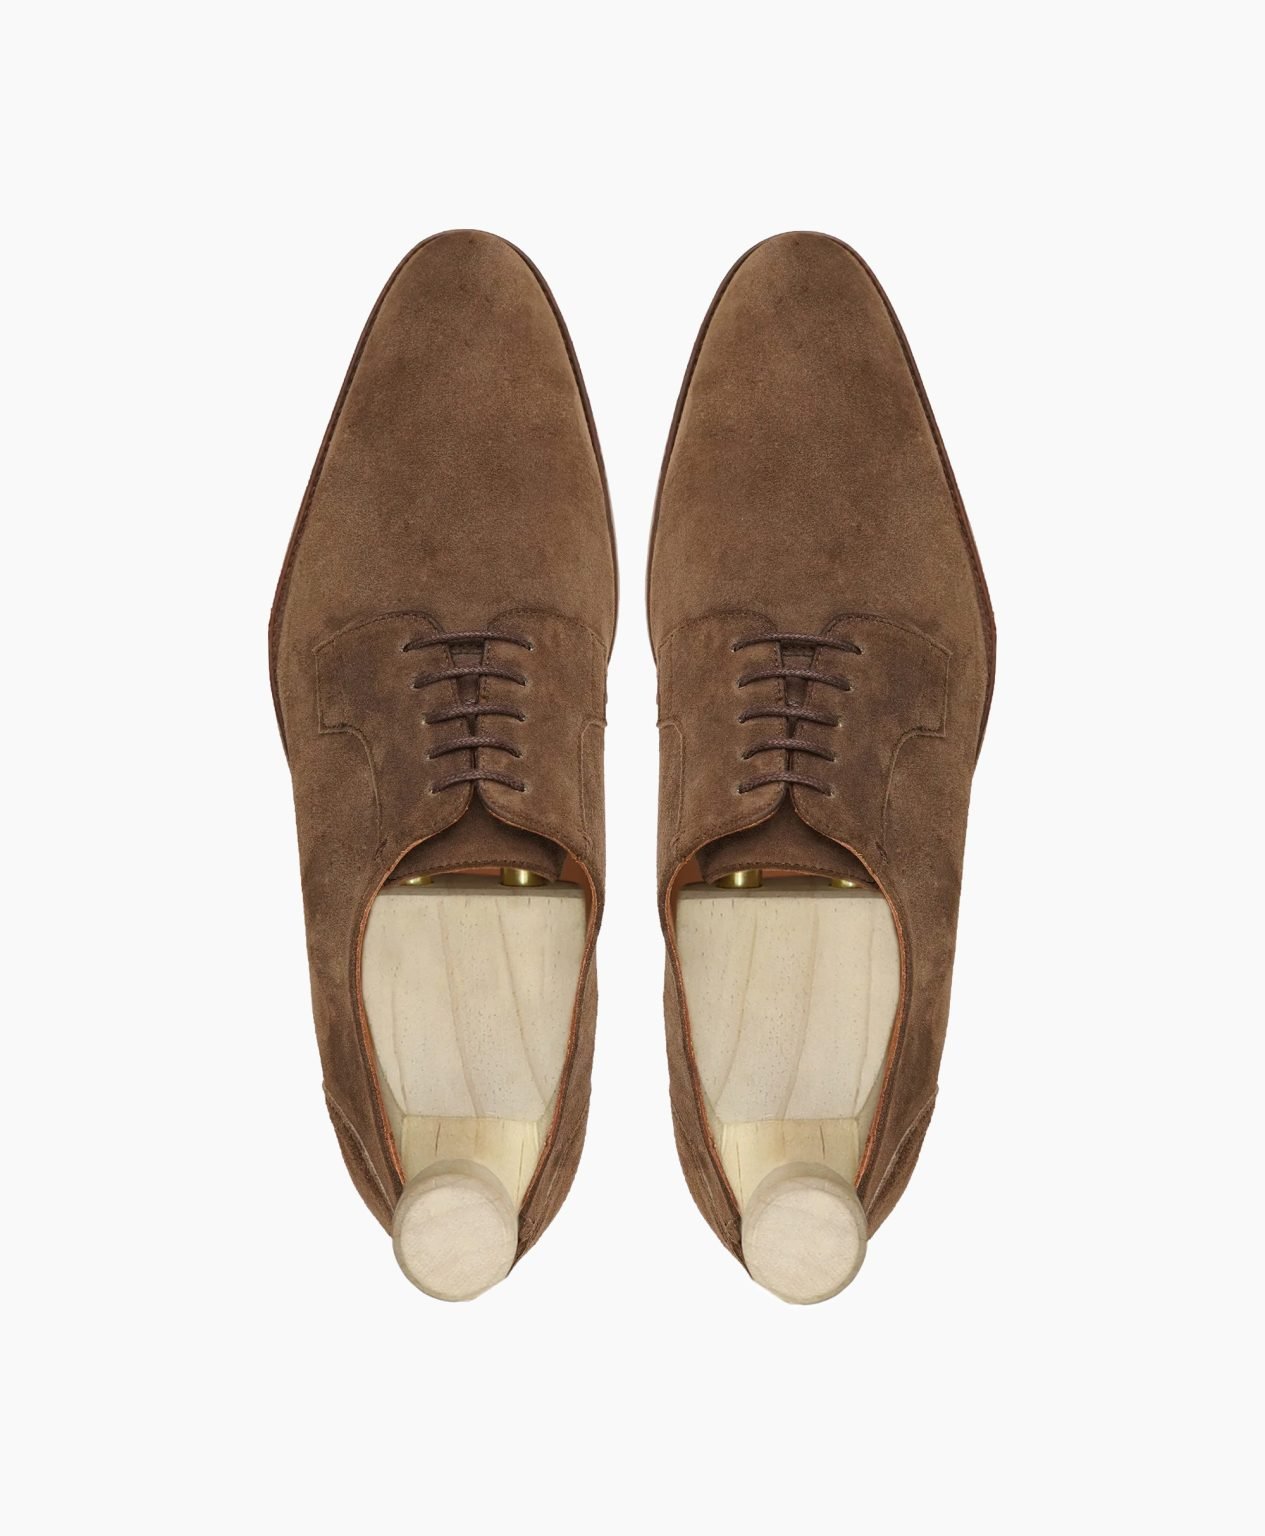 bolsover-derby-brown-suede-leather-shoes-image202